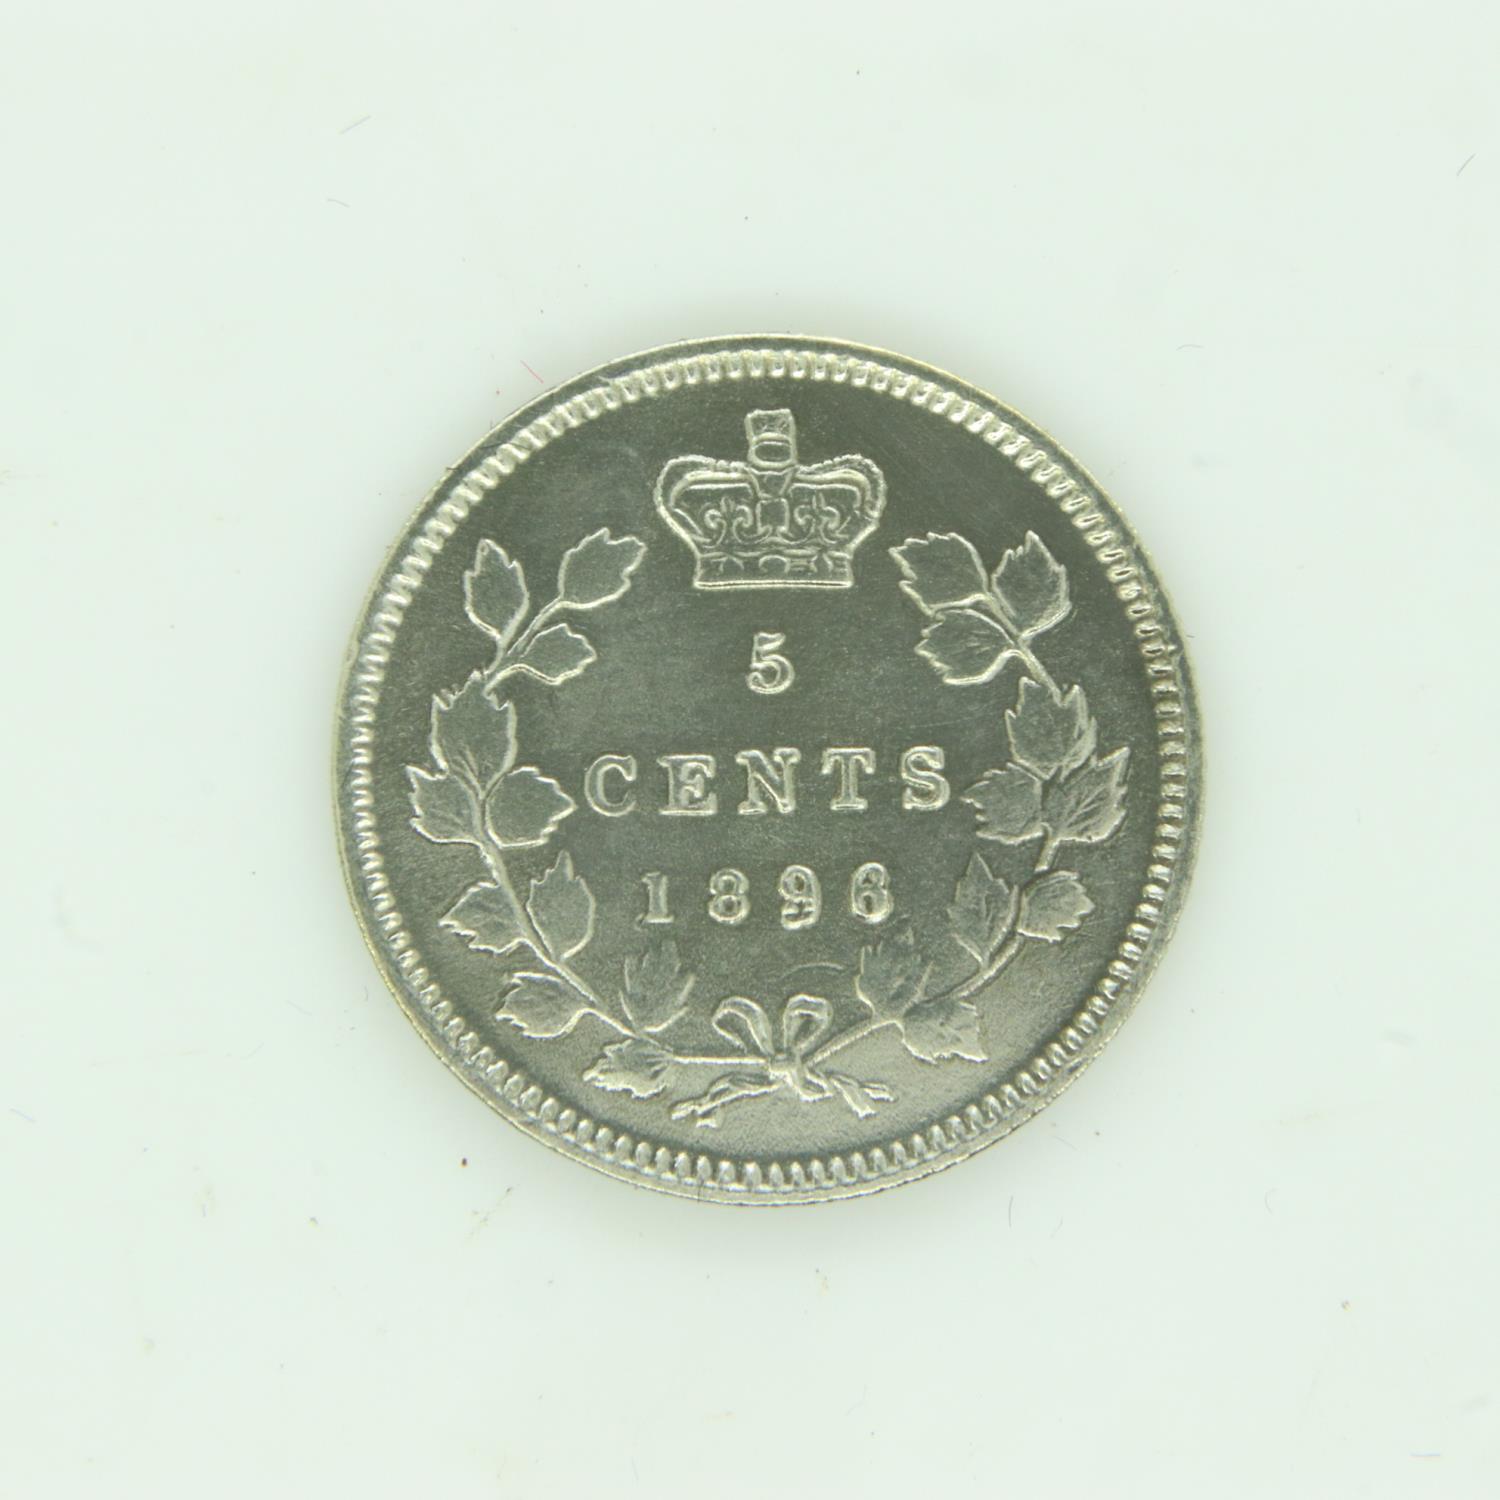 1896 Canadian silver 5 cents of Queen Victoria - EF grade. UK P&P Group 0 (£6+VAT for the first